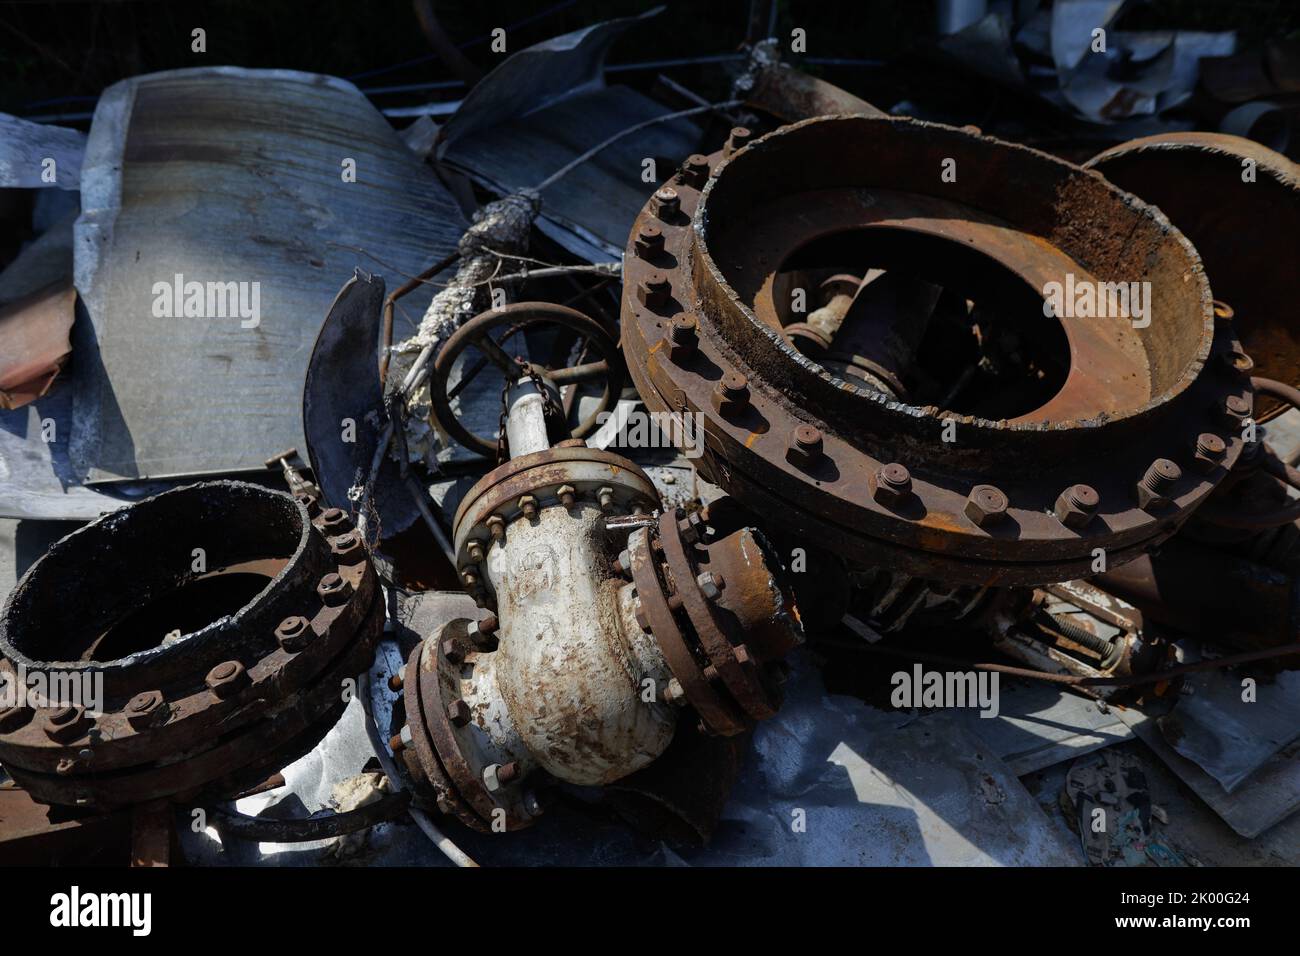 Details with old and rusty industrial metallic objects at a Romanian abandoned power plant. Stock Photo